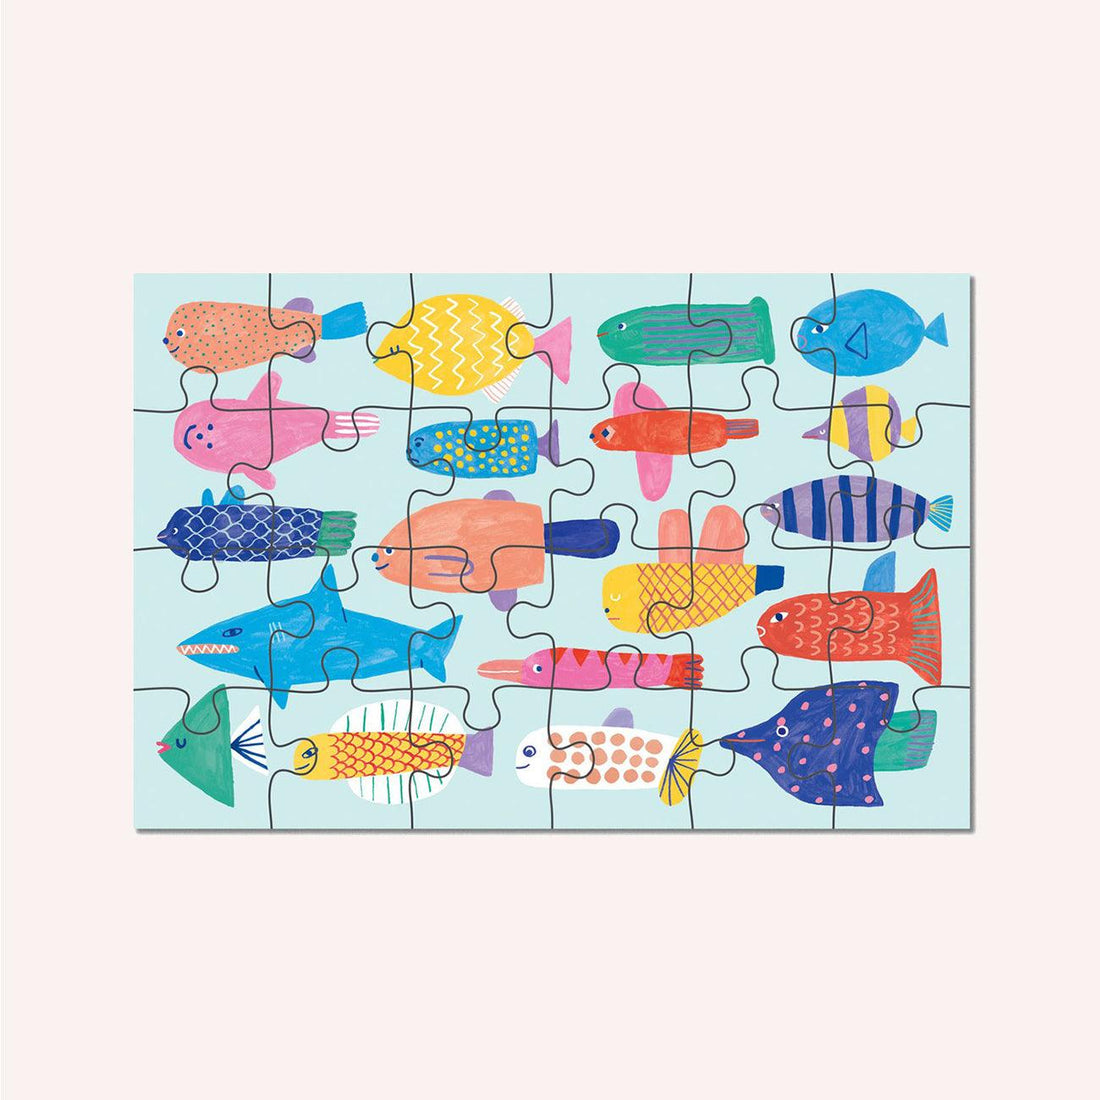 24 Piece Kids Puzzle - Rainbow Reef (TESTING PRODUCT)